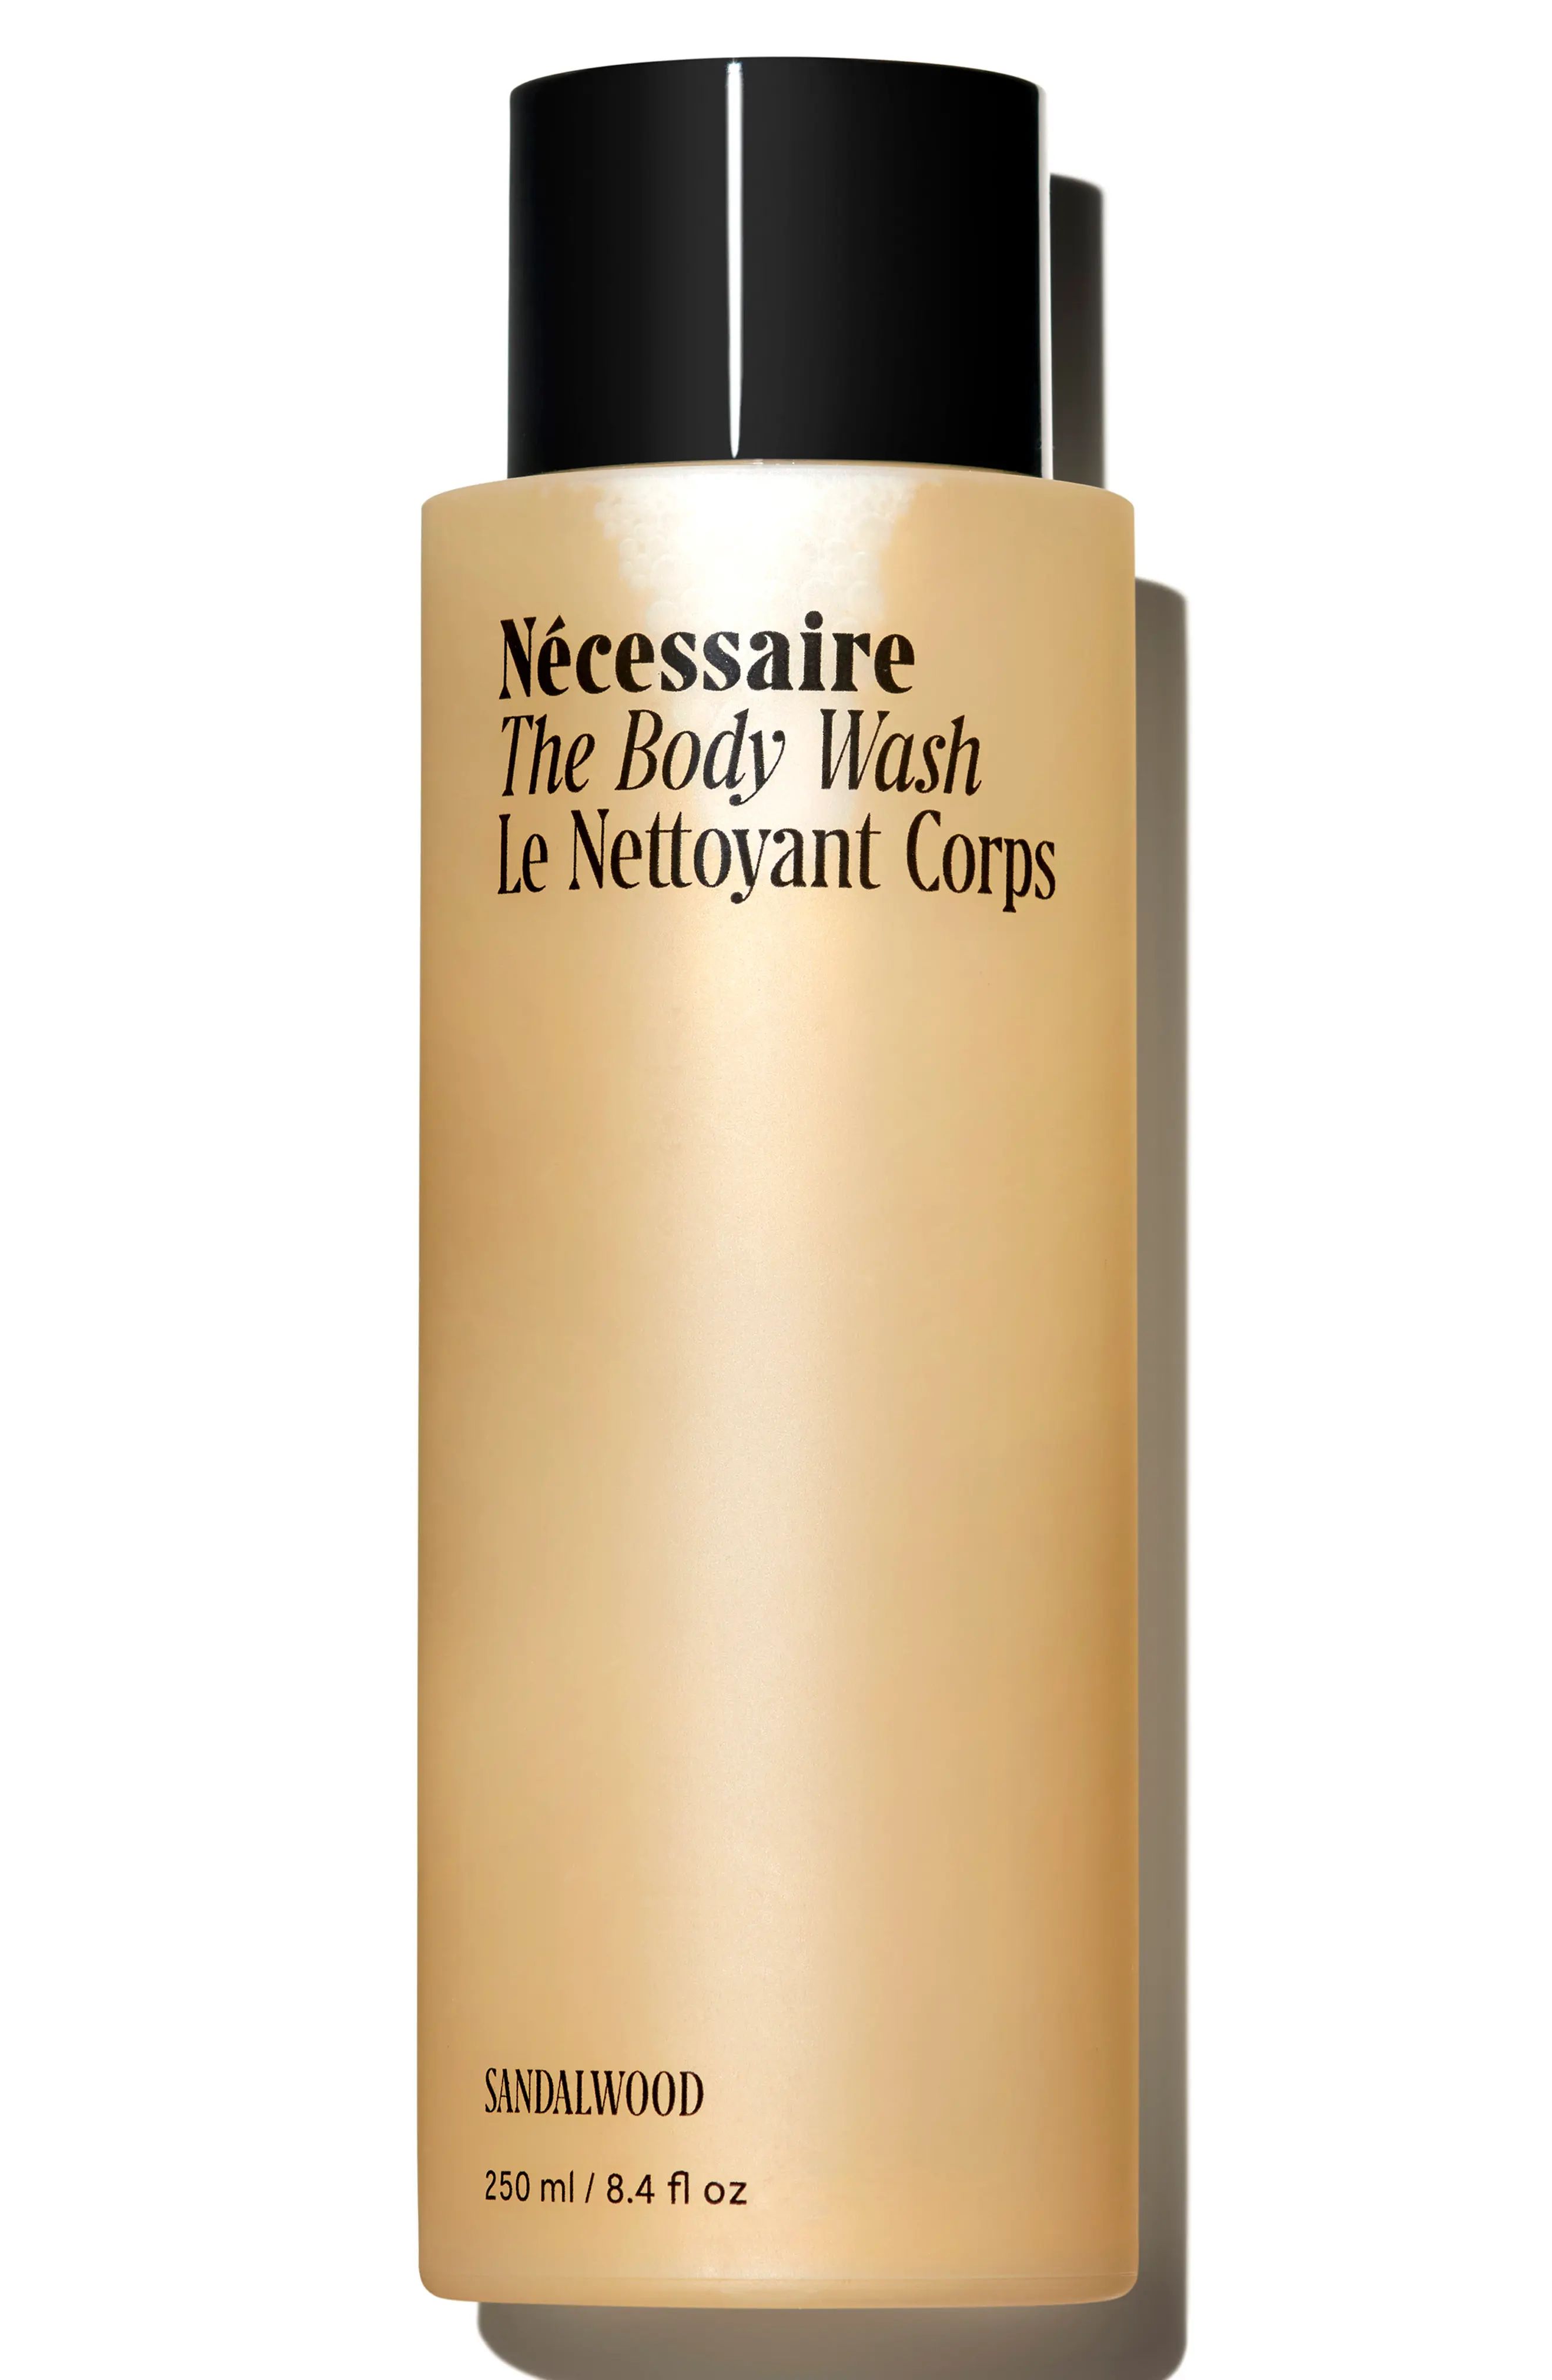 Necessaire The Body Wash in Sandalwood at Nordstrom | Nordstrom